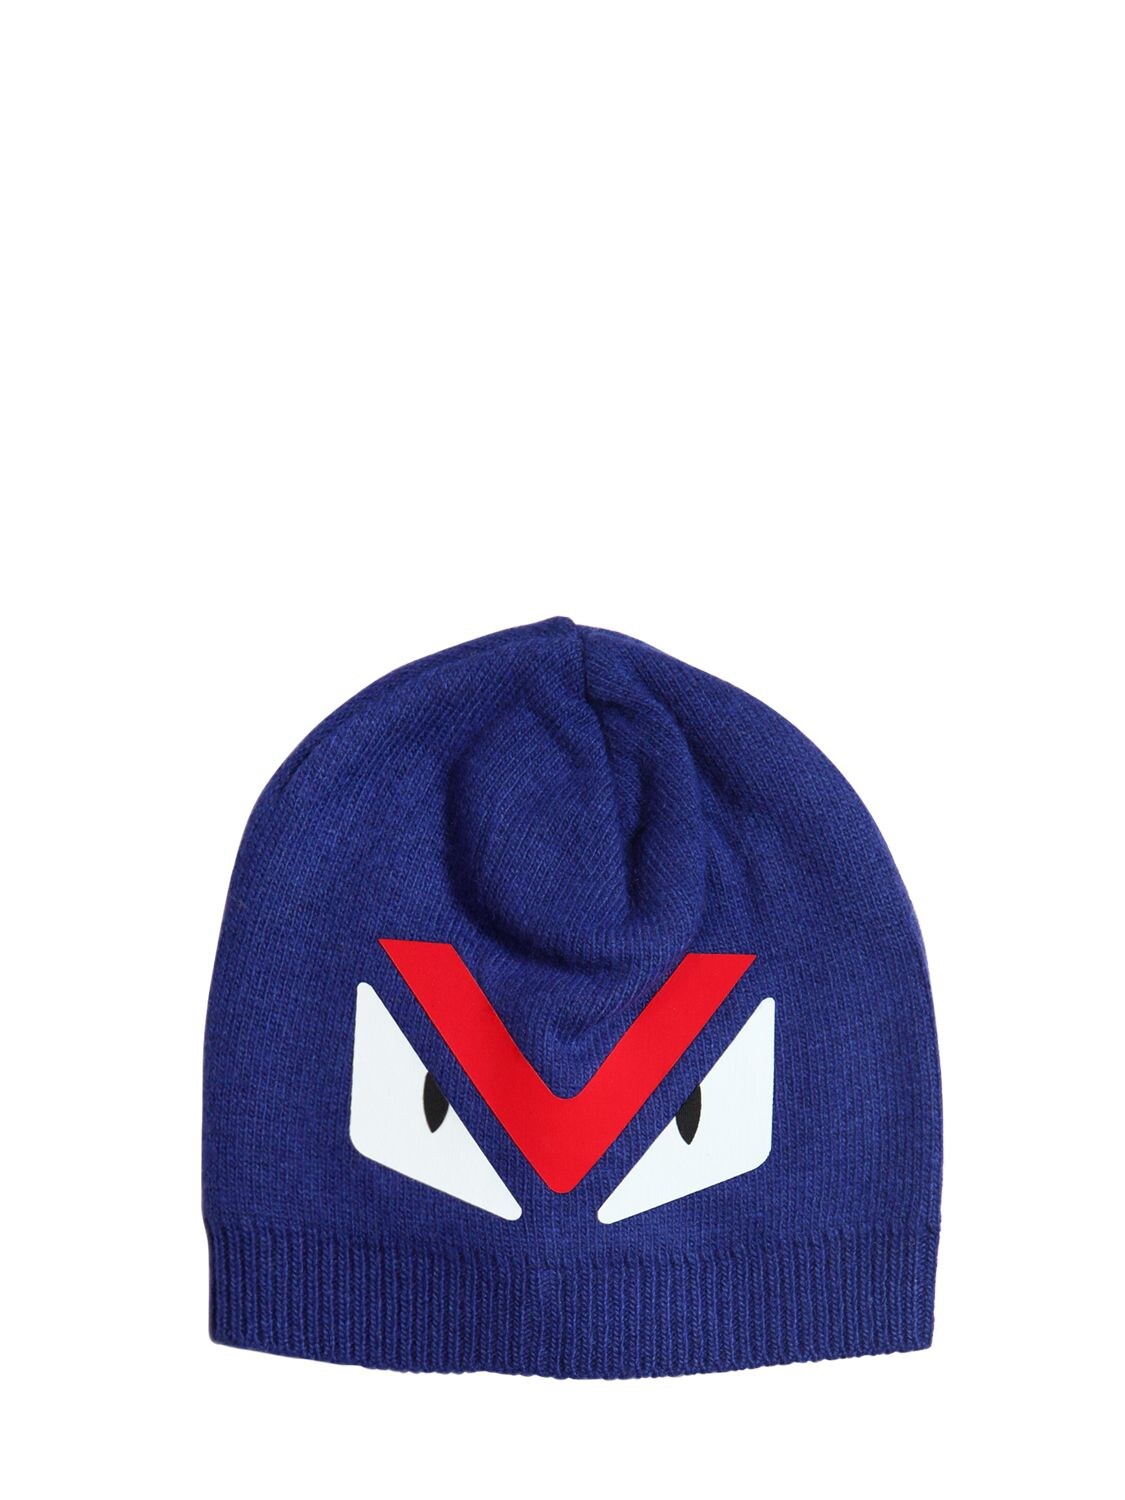 Fendi Kids' Doubled Knitted Wool & Cashmere Hat In Royal Blue